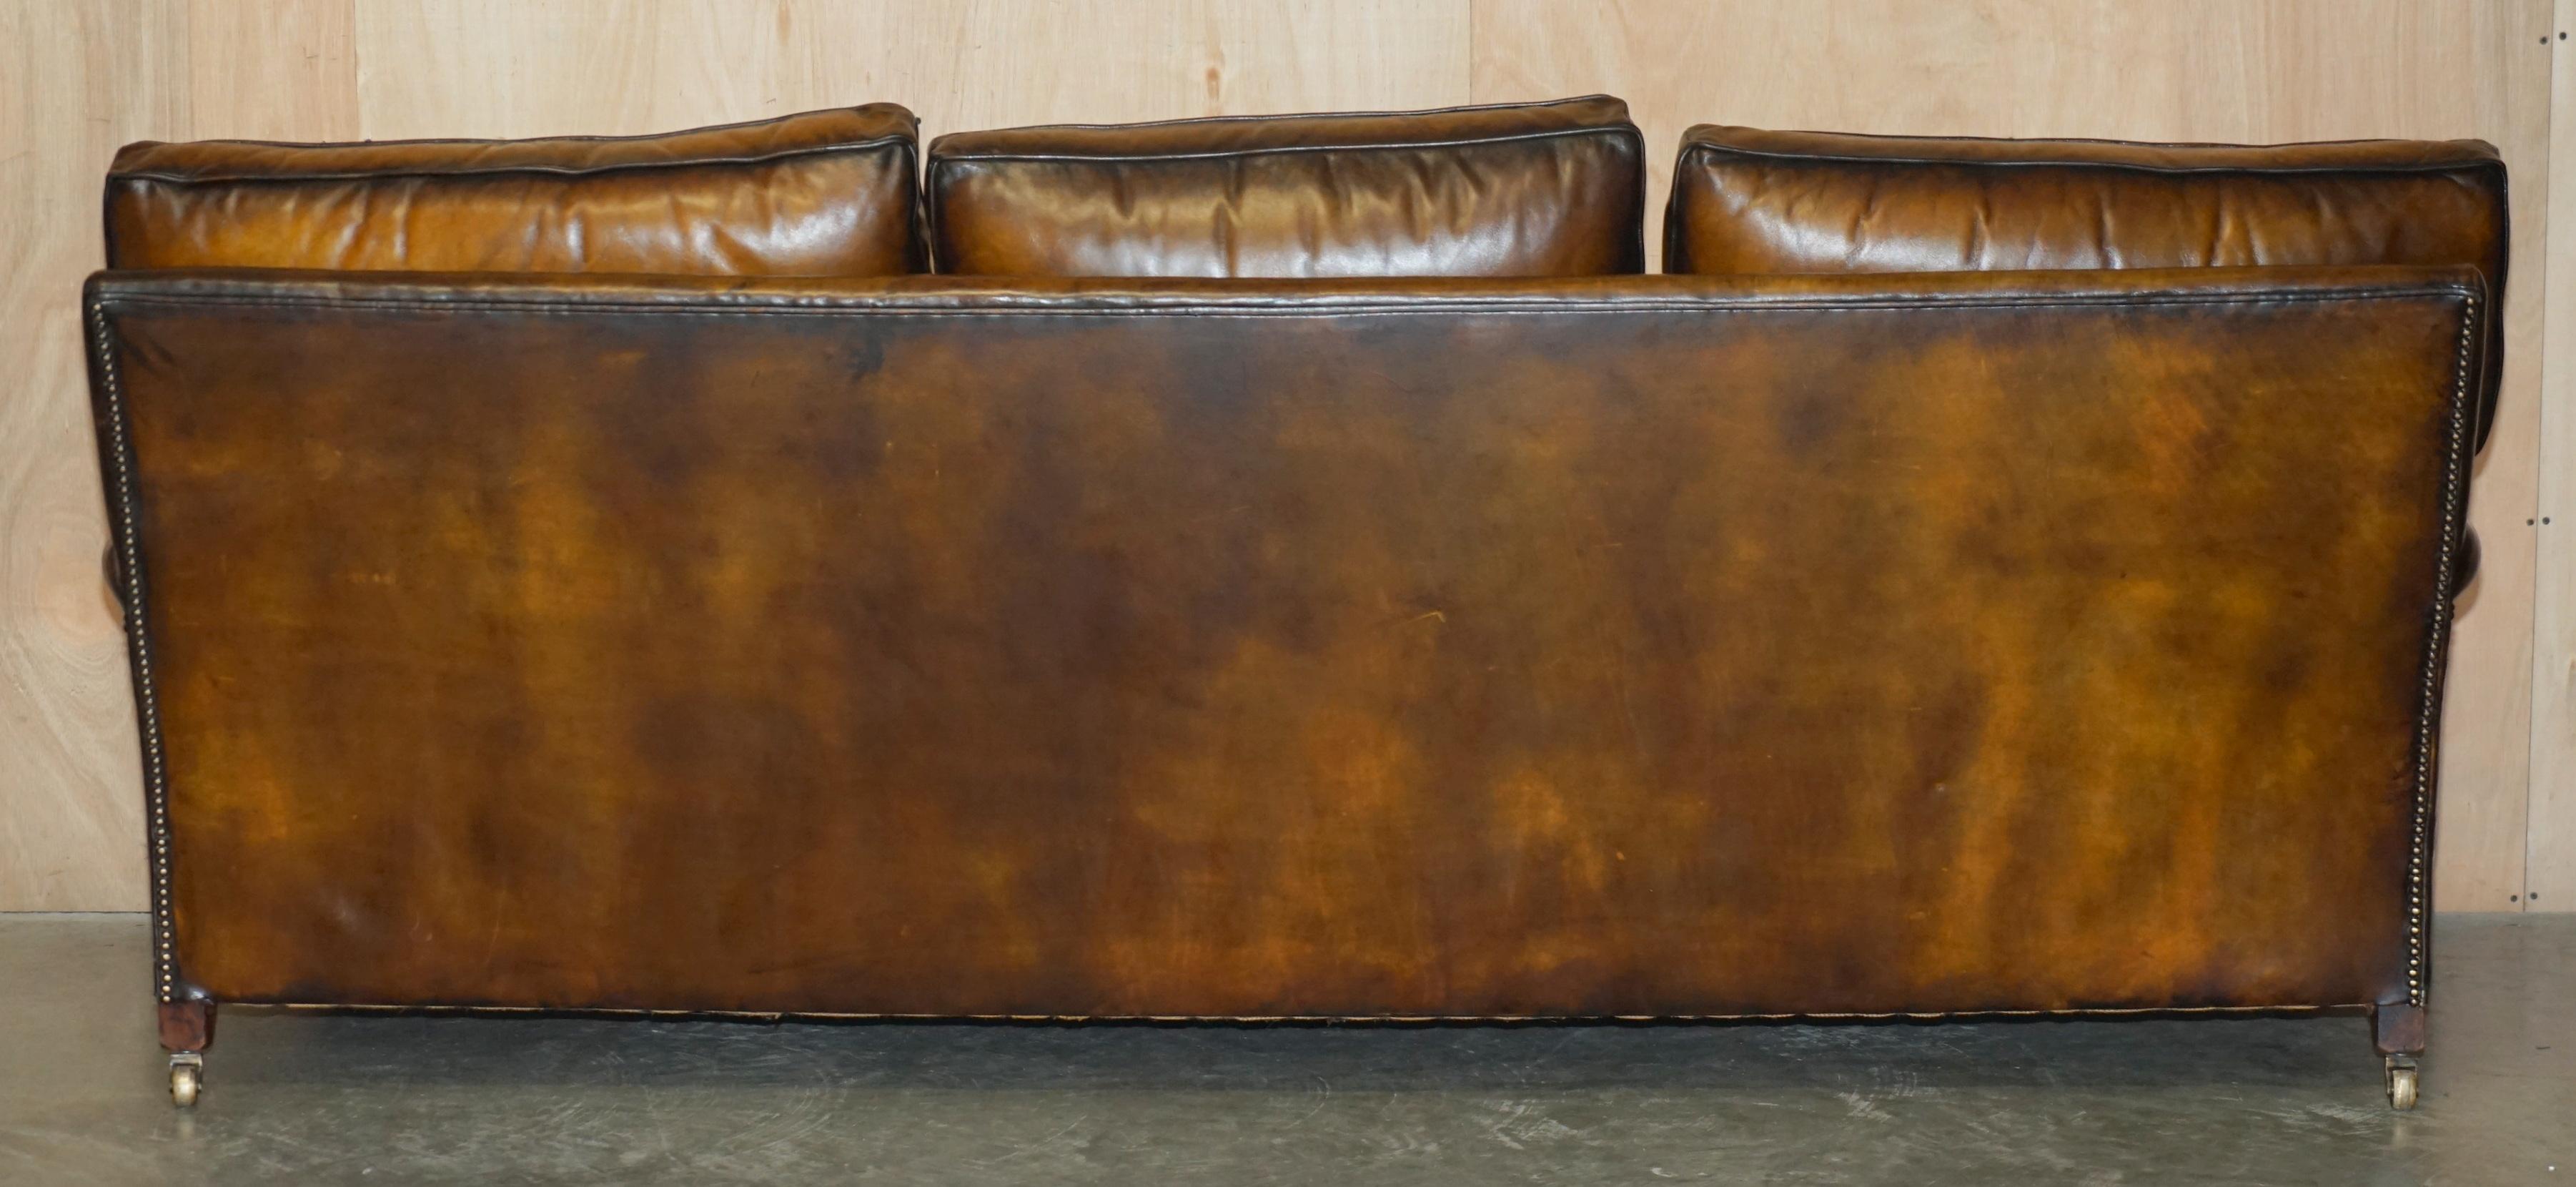 GEORGE SMITH RESTORED HOWARD & SON'S BROWN LEATHER SiGNATURE SCROLL ARM SOFA For Sale 9